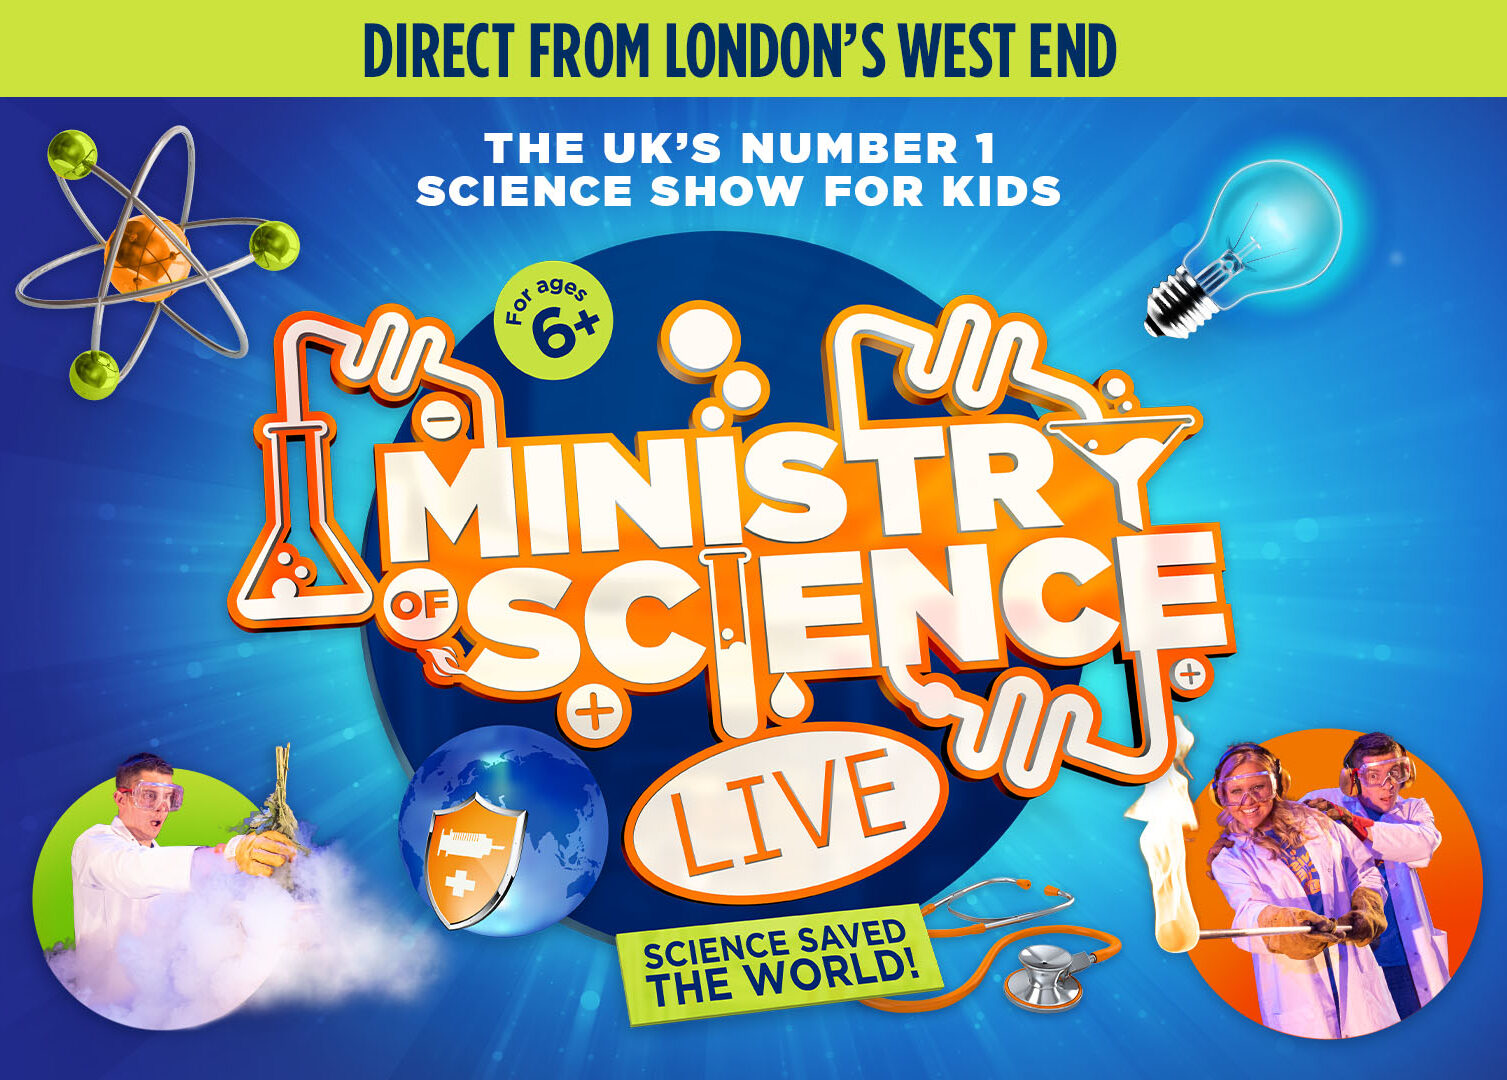 Ministry of Science Live – Science Saved The World